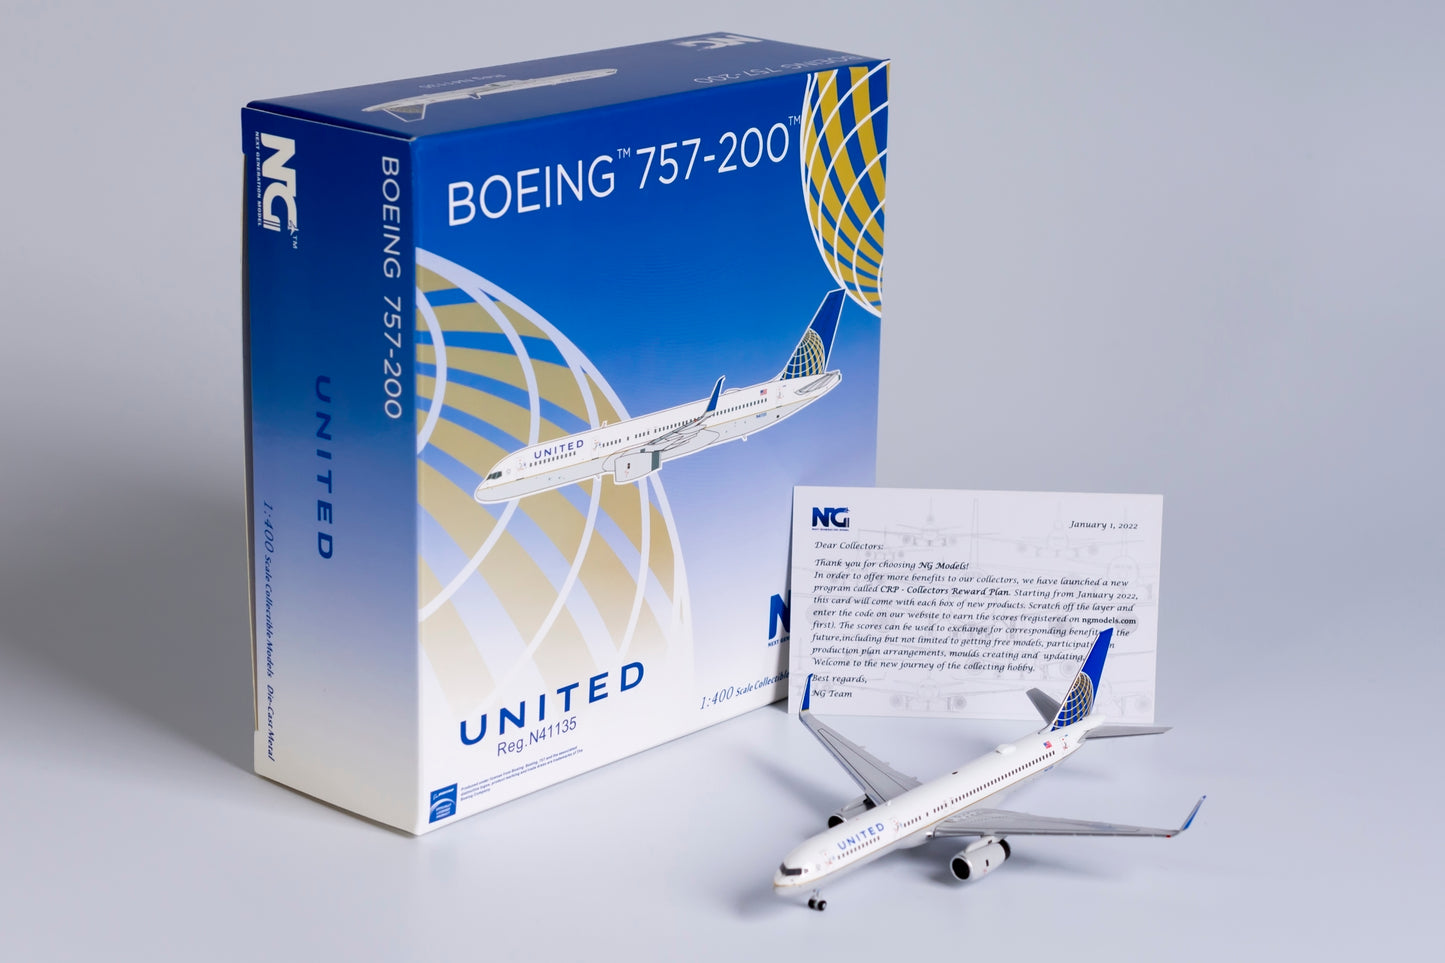 1:400 NG Models United Airlines Boeing 757-200 "Co-Merger Livery" N41135 53179